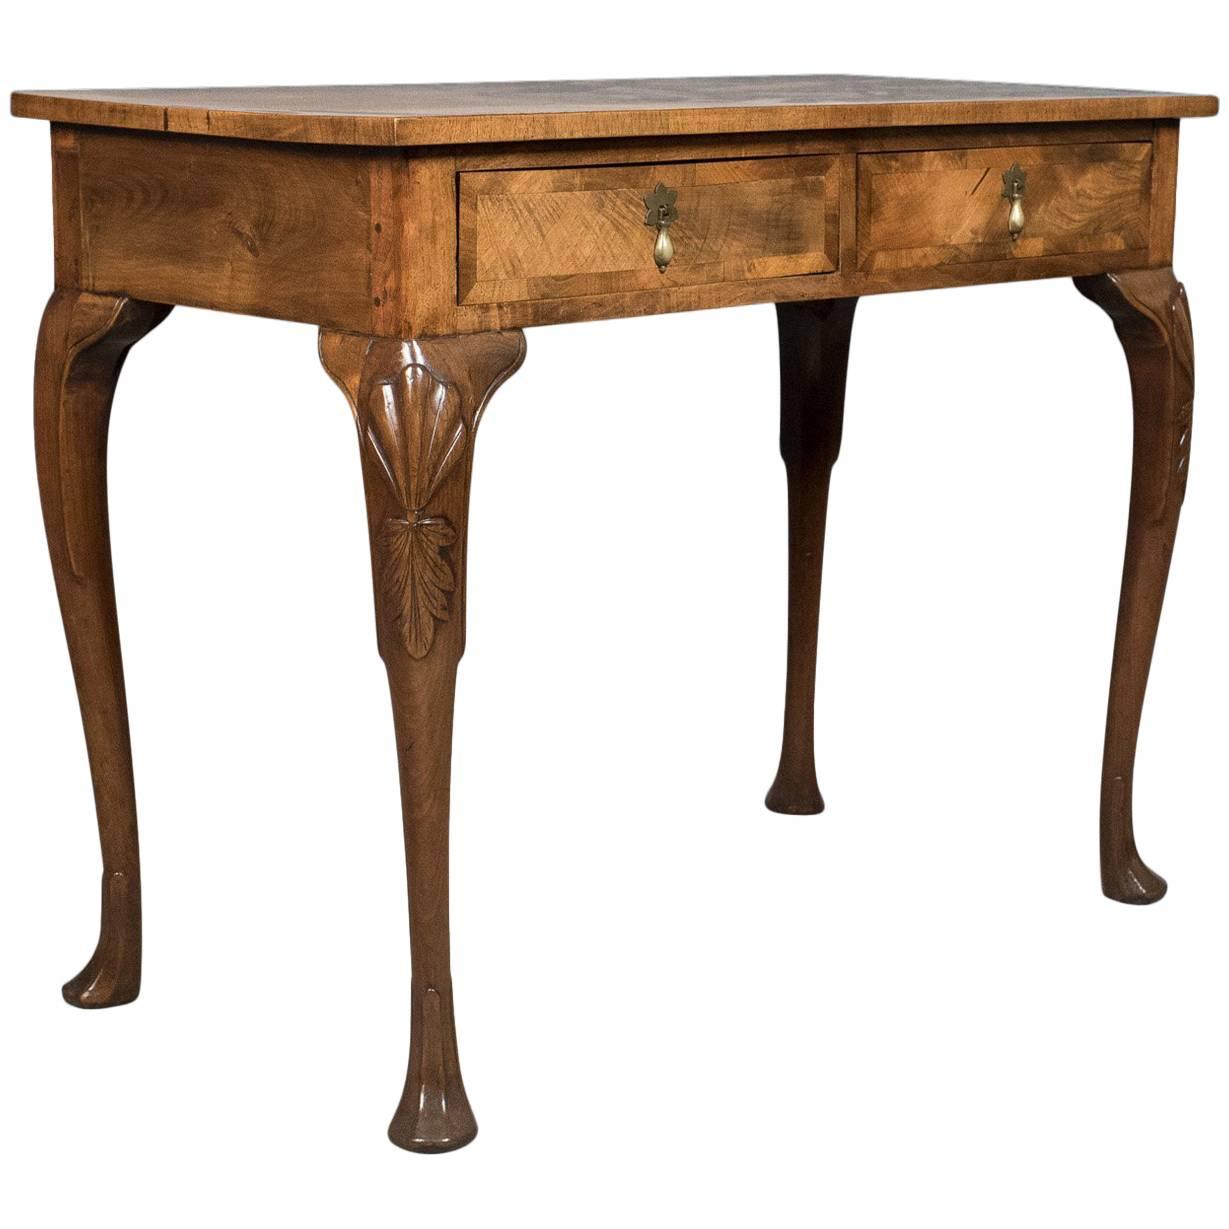 Edwardian Antique Side Table with Drawers, English, Walnut, circa 1910